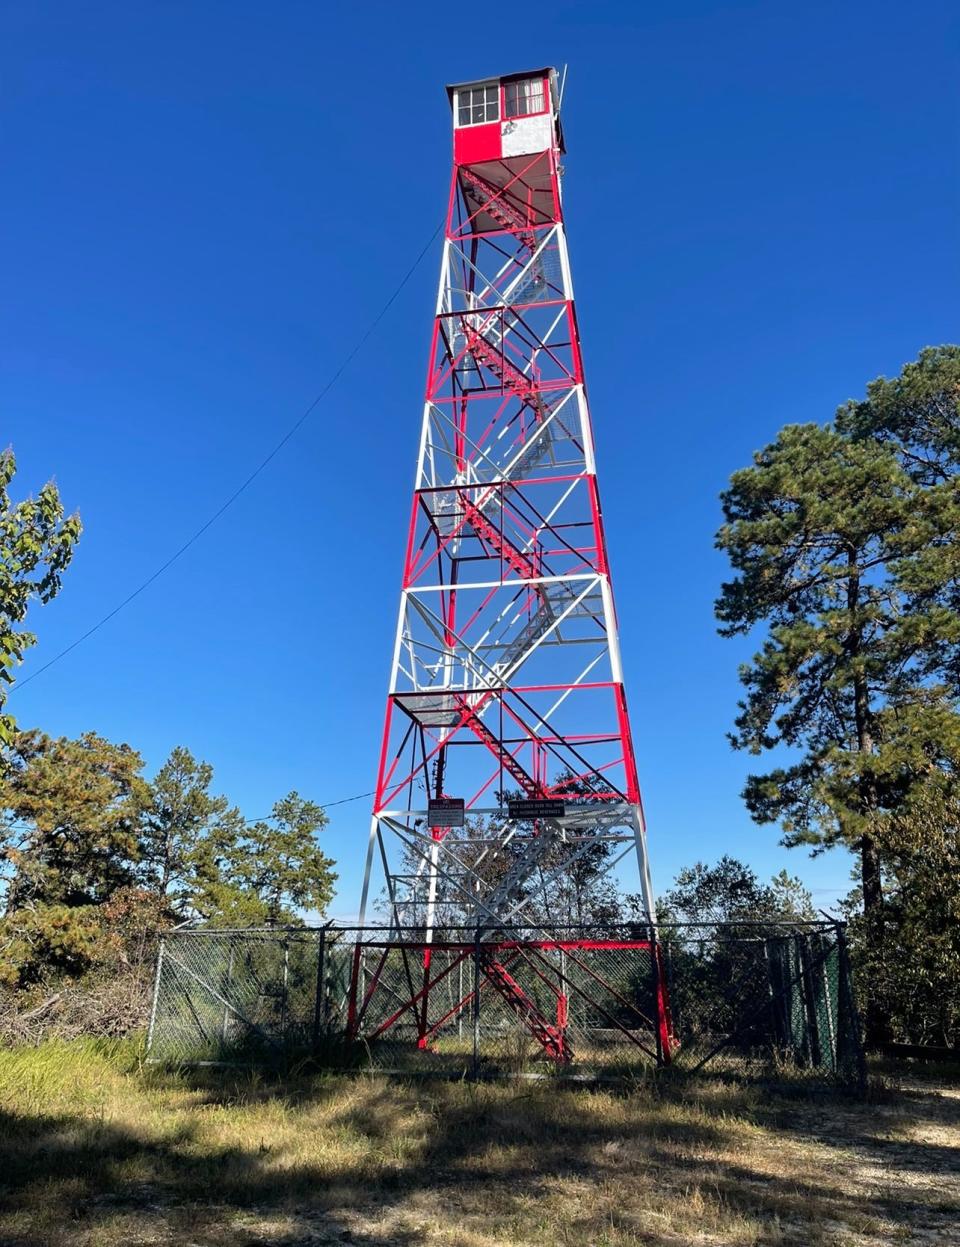 The Apple Pie Hill fire tower, which is the highest point in the Pine Barrens. The tower is not open to visitors.